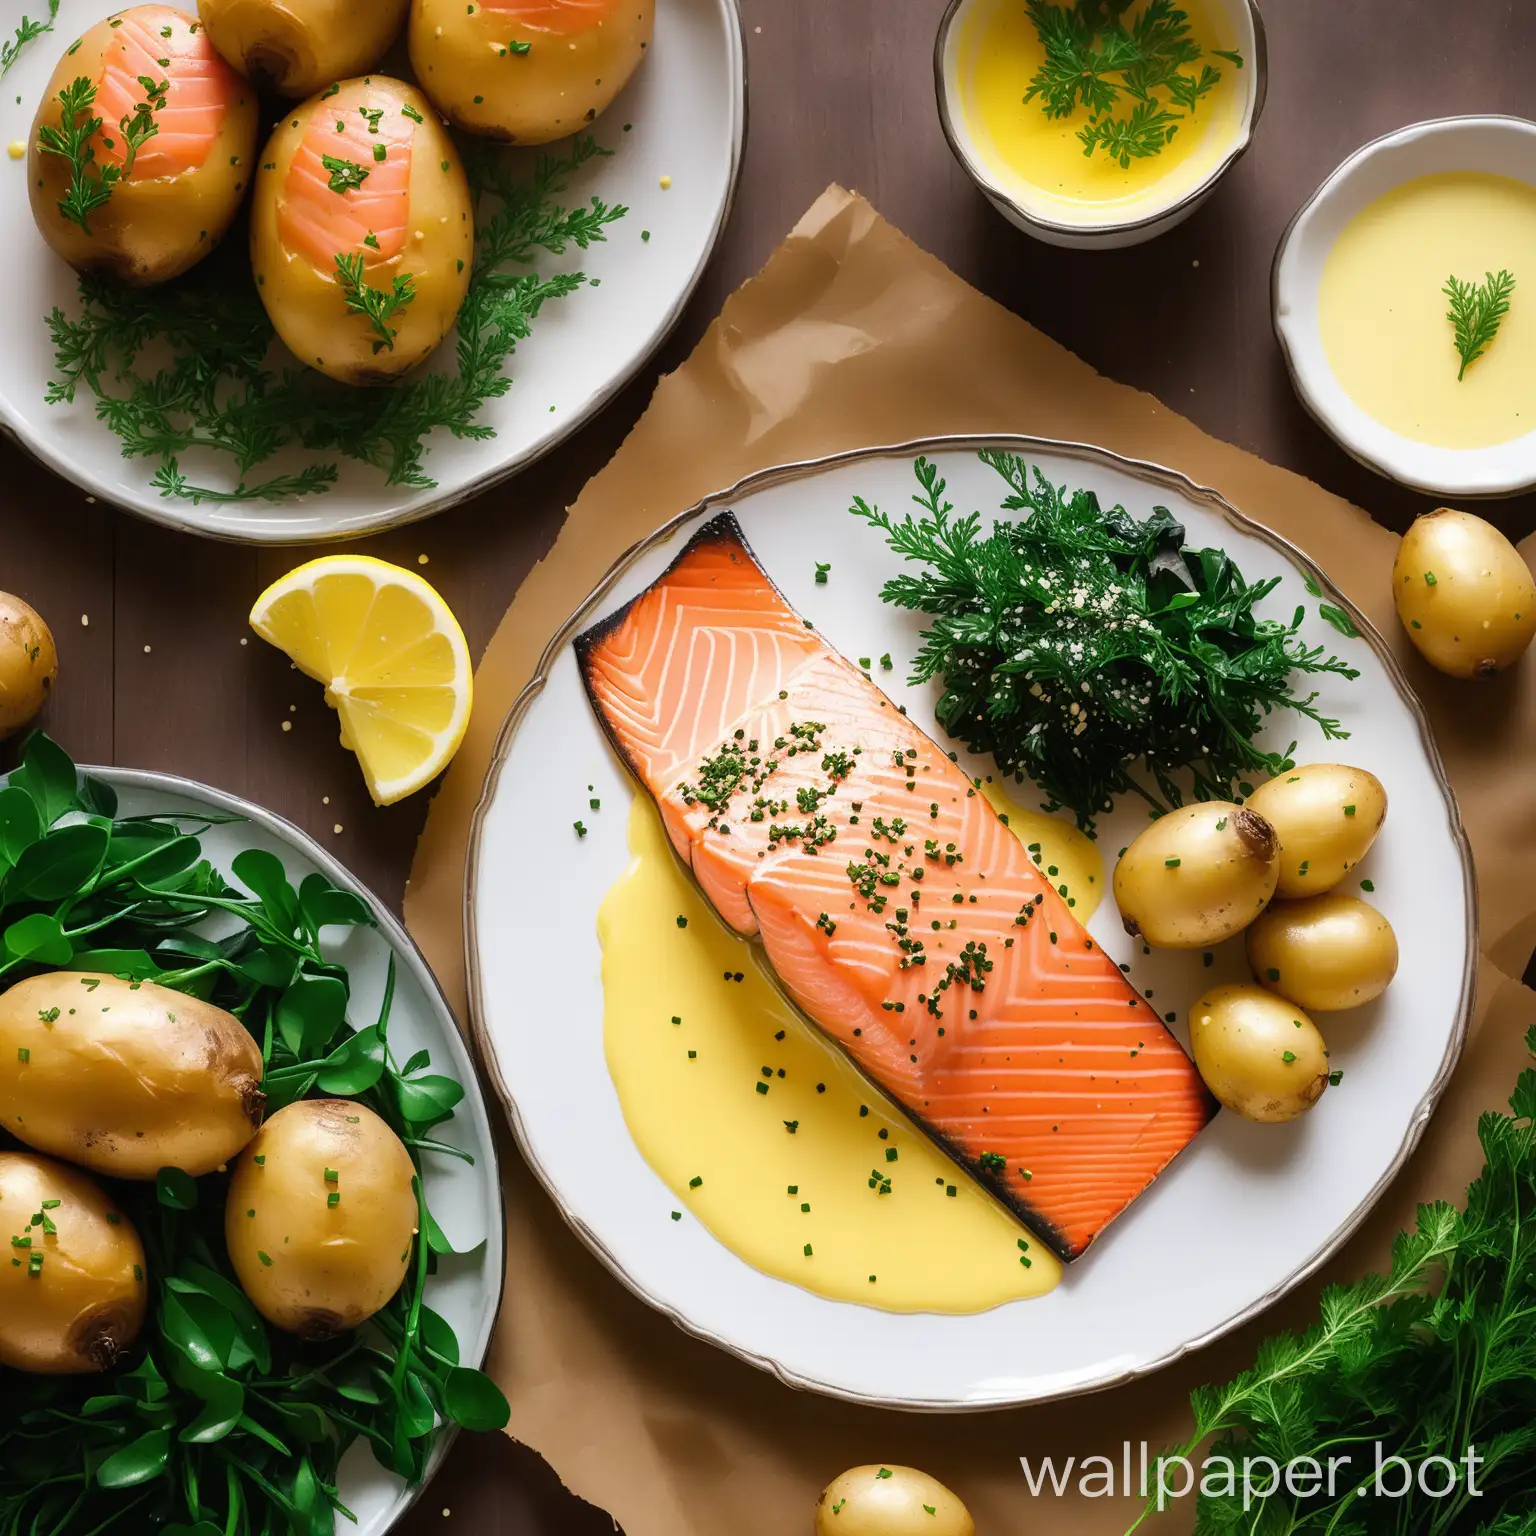 Delicious-Roasted-Salmon-and-Potatoes-with-Lemon-Butter-Sauce